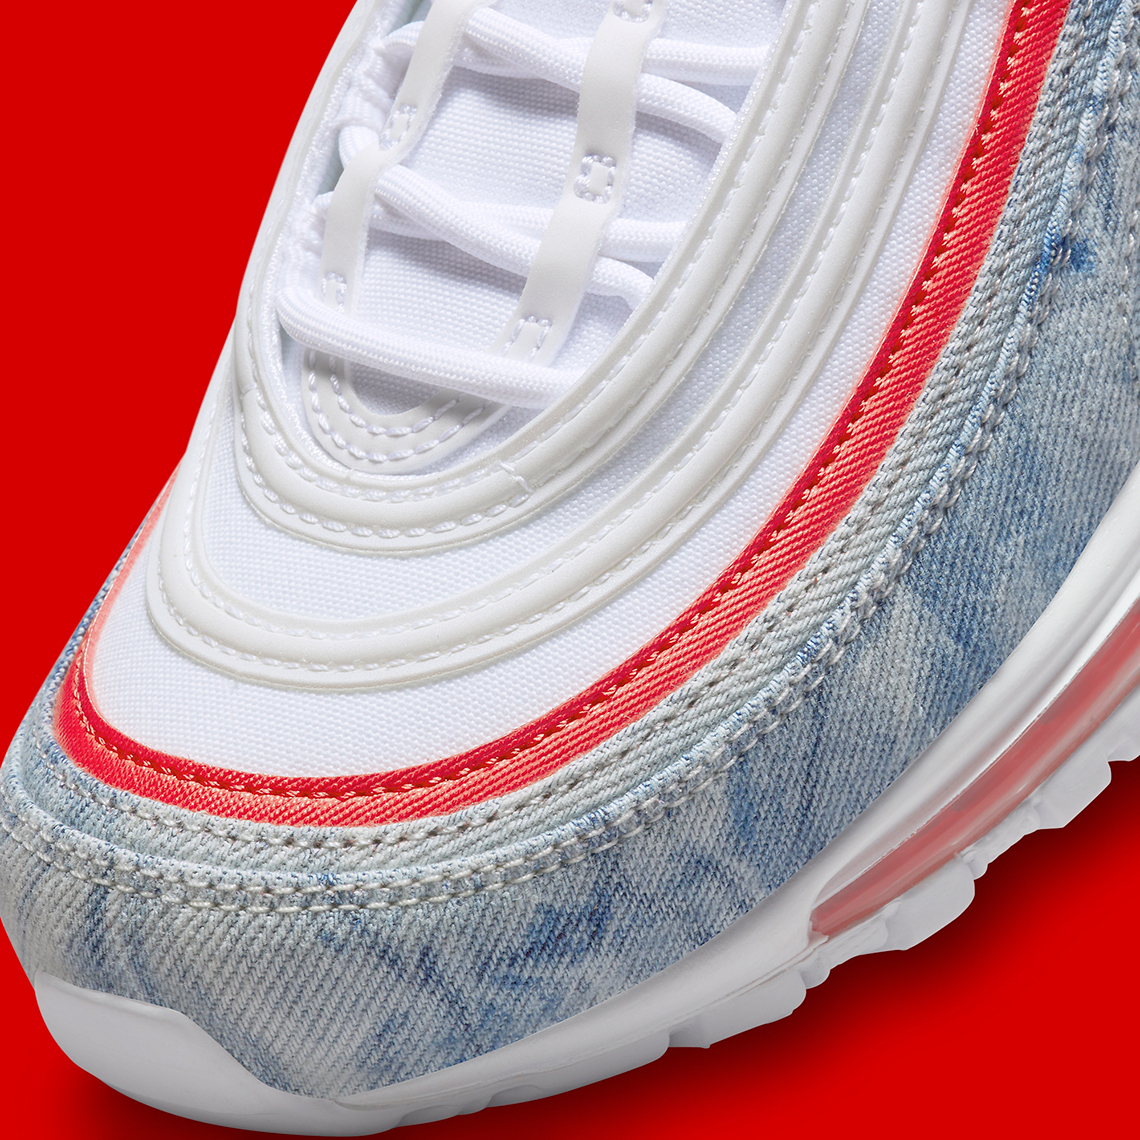 nike air max 97 washed denim release date 6